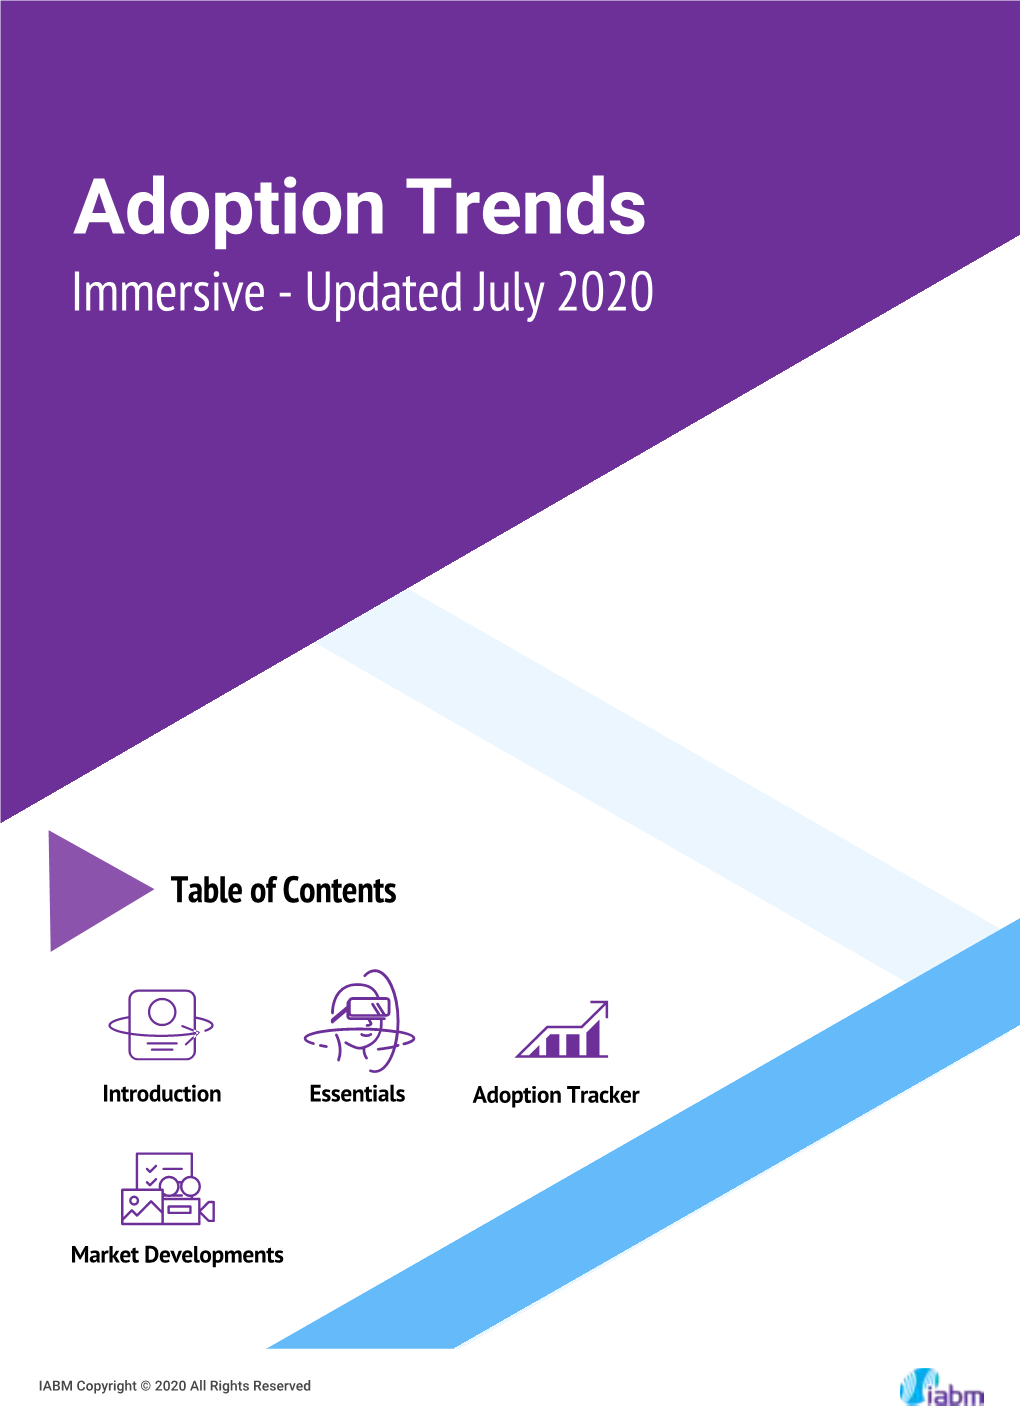 Adoption Trends Immersive - Updated July 2020